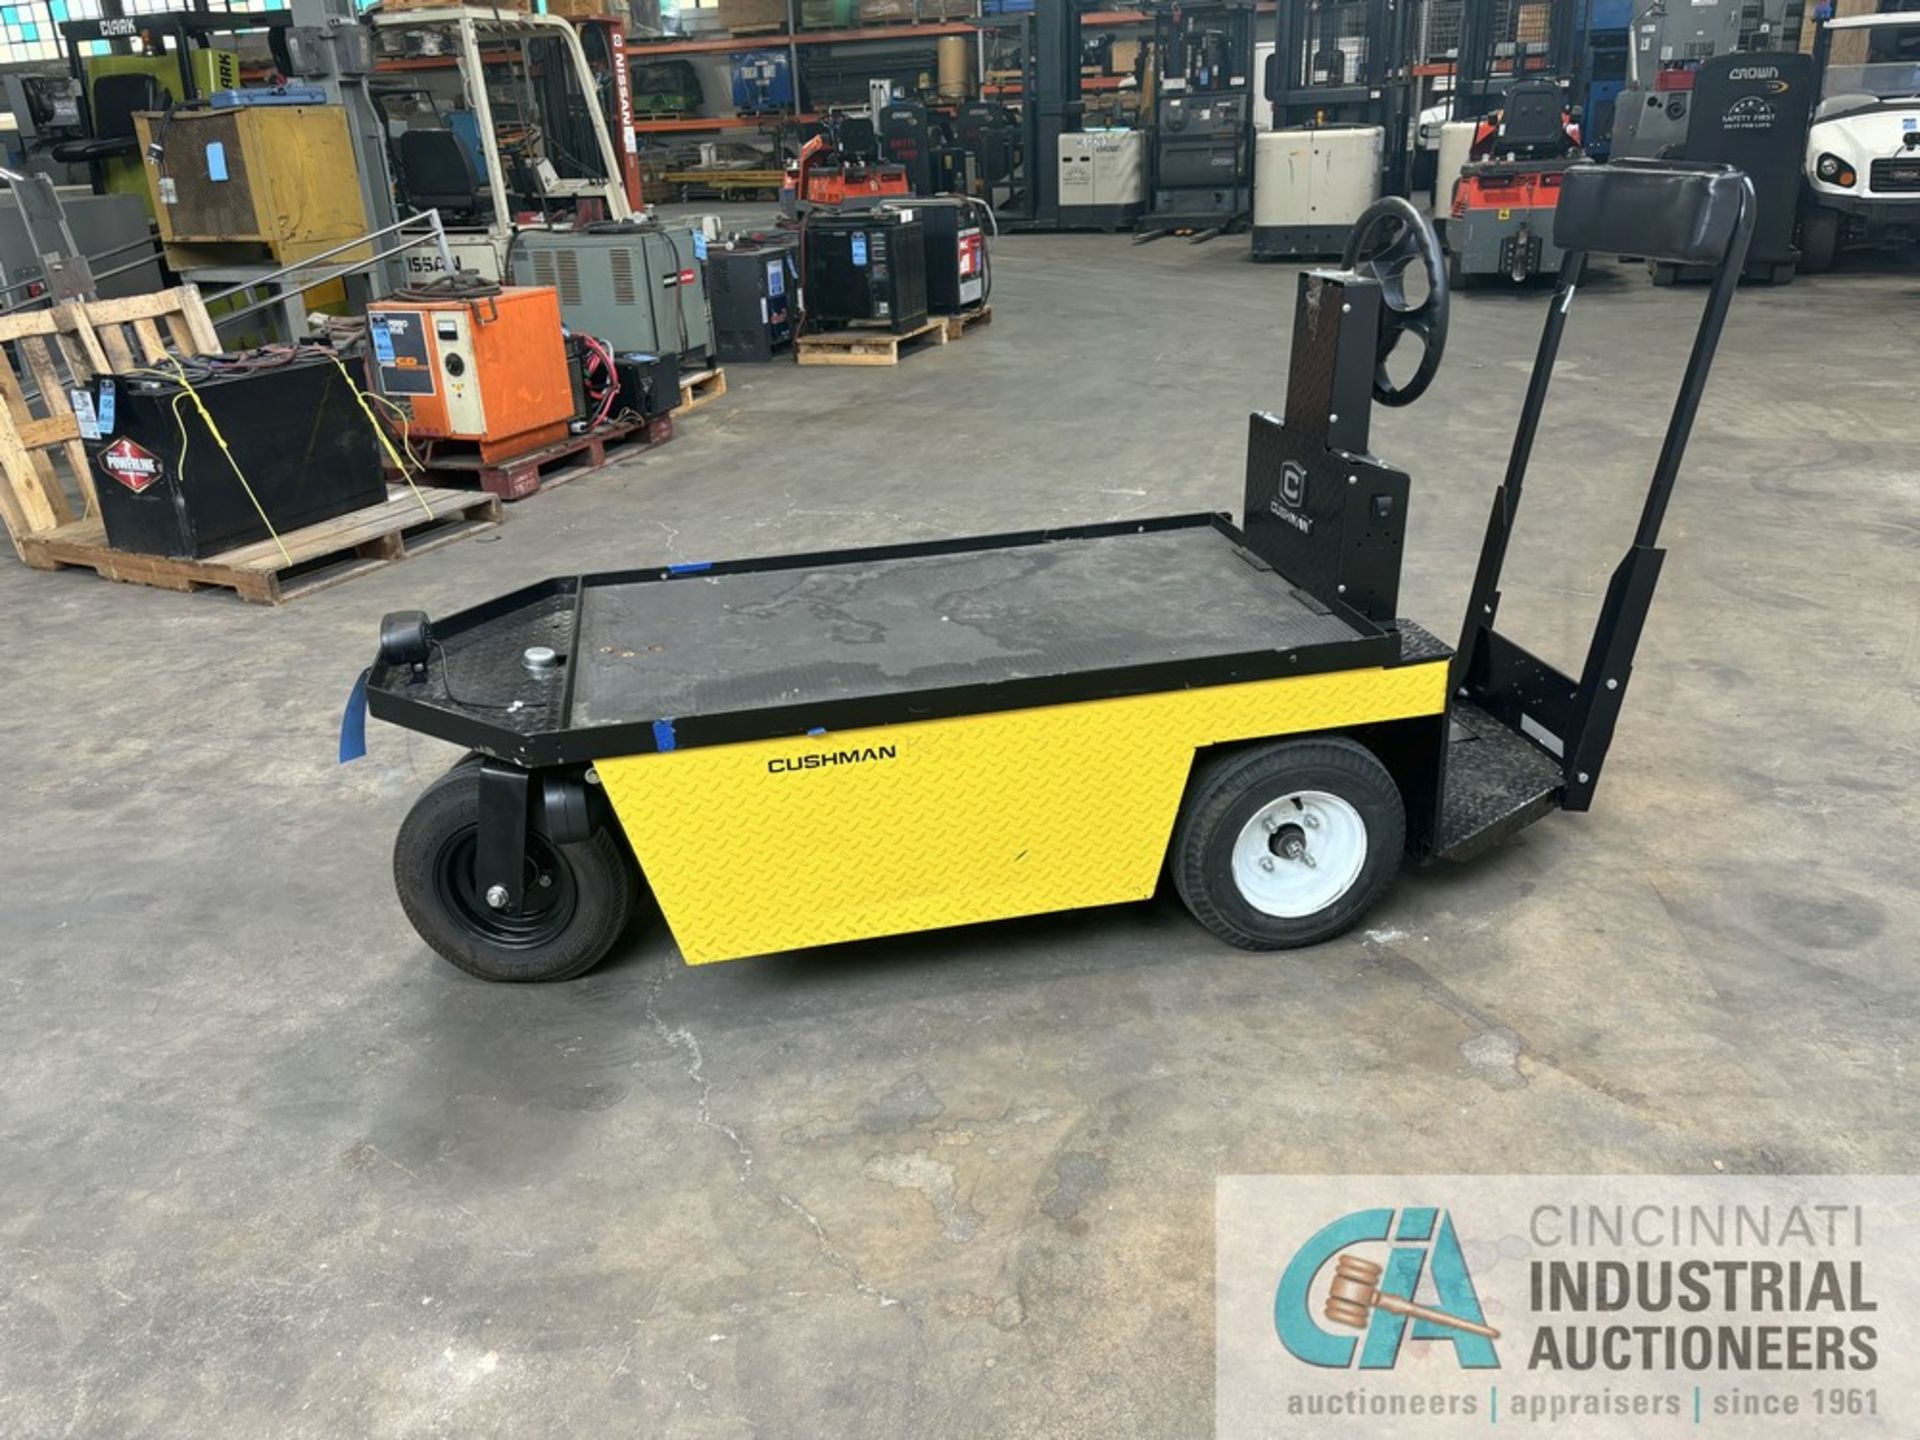 CUSHMAN STOCKCHASER ELECTRIC STAND-UP UTILITY CART; S/N 3484428, WITH BUILT IN 24-VOLT CHARGER - Image 3 of 10